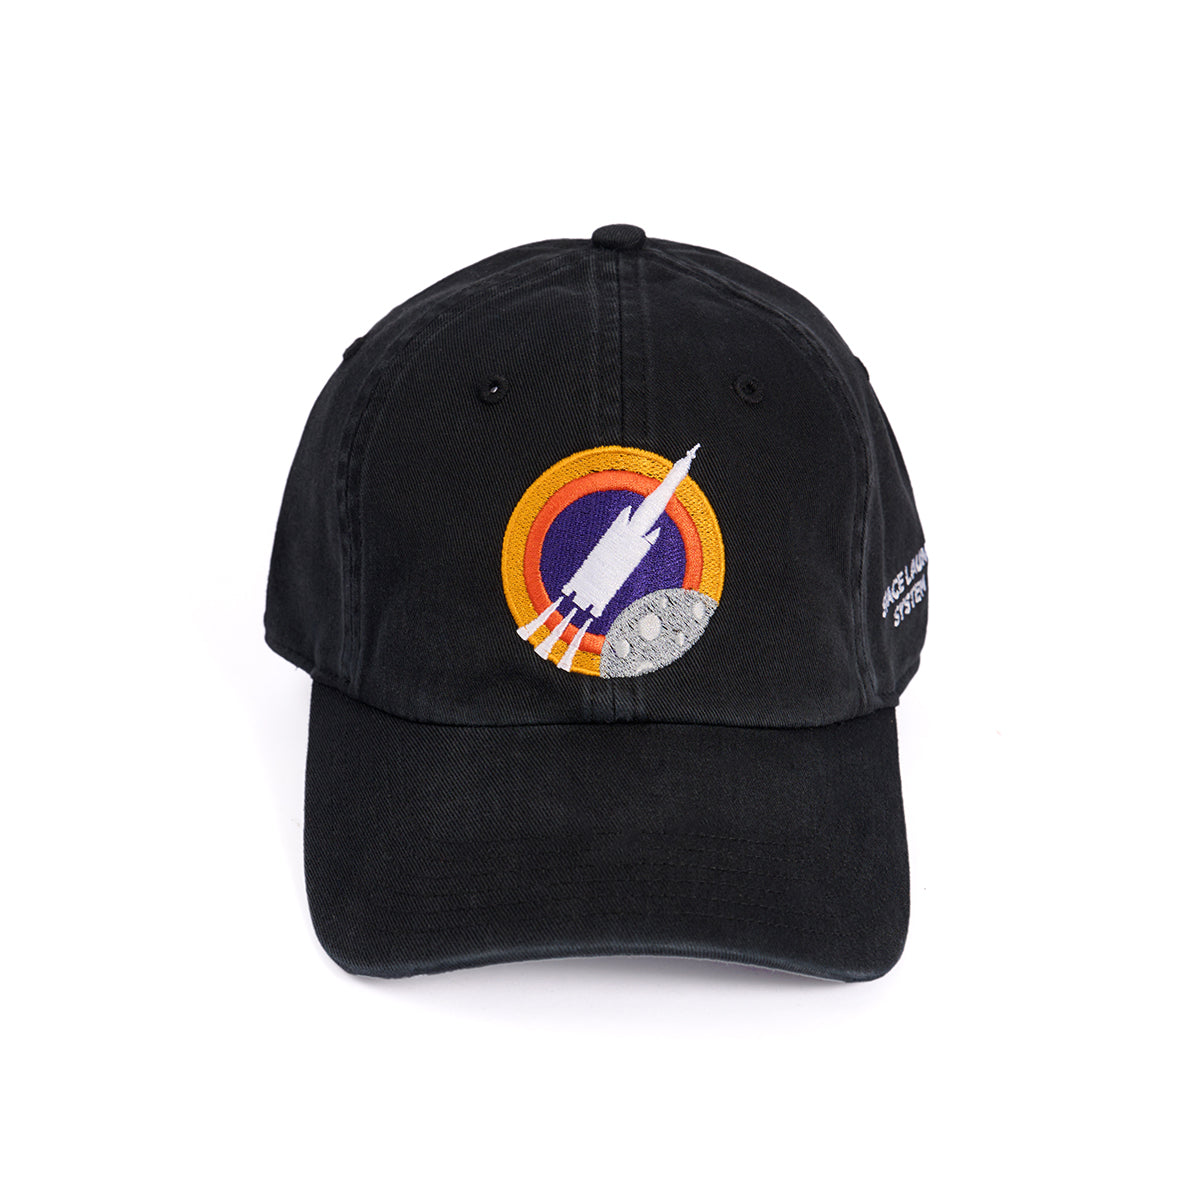 Skyward hat, featuring the iconic Boeing Space Launch System embroidered in a roundel design on the front.